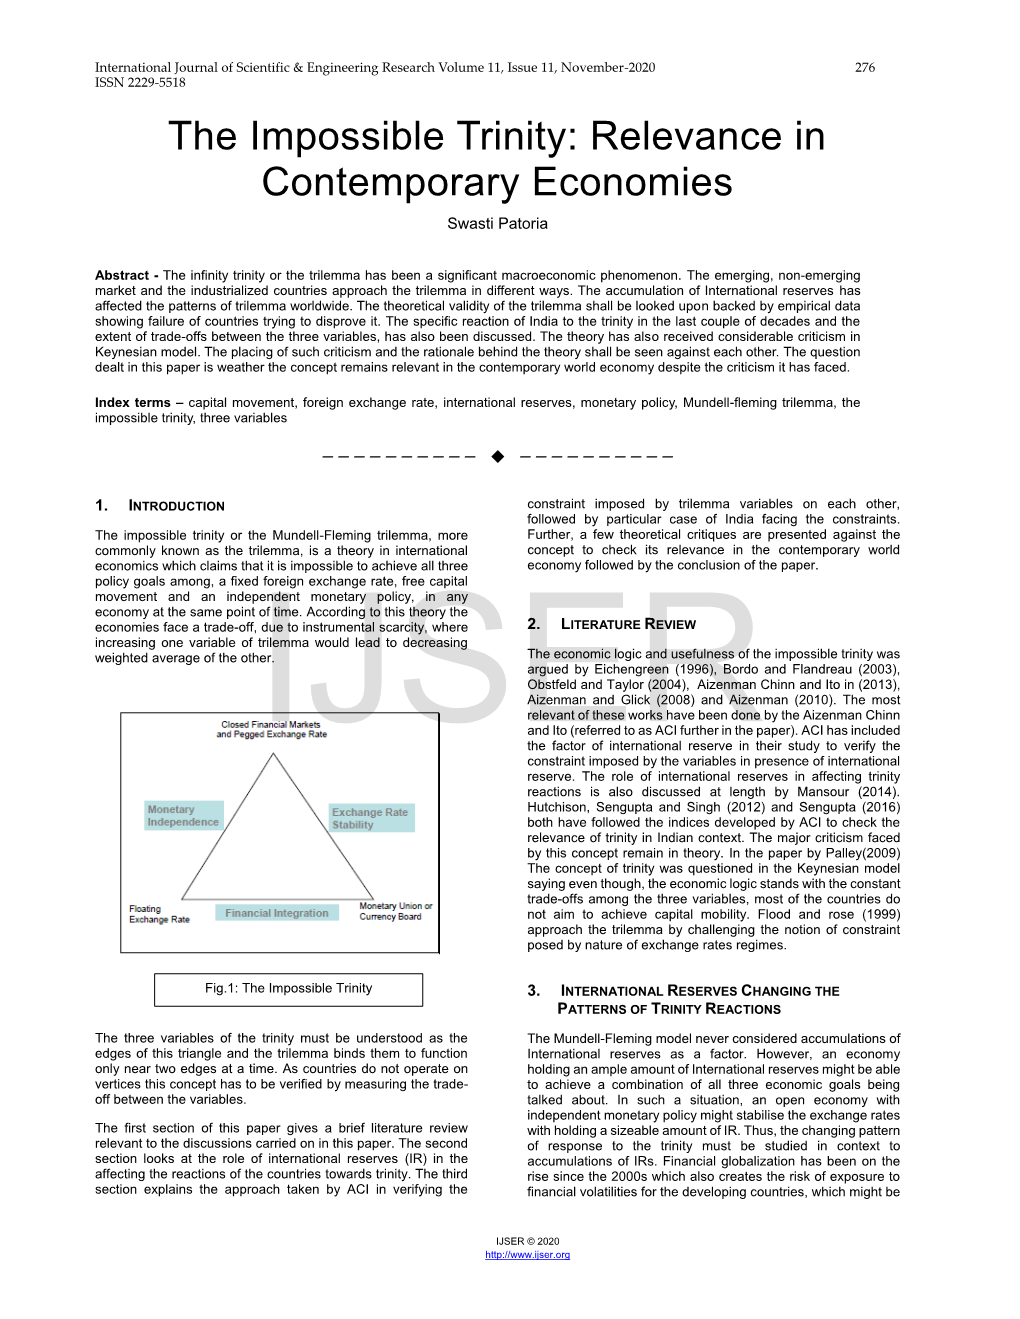 The Impossible Trinity: Relevance in Contemporary Economies Swasti Patoria